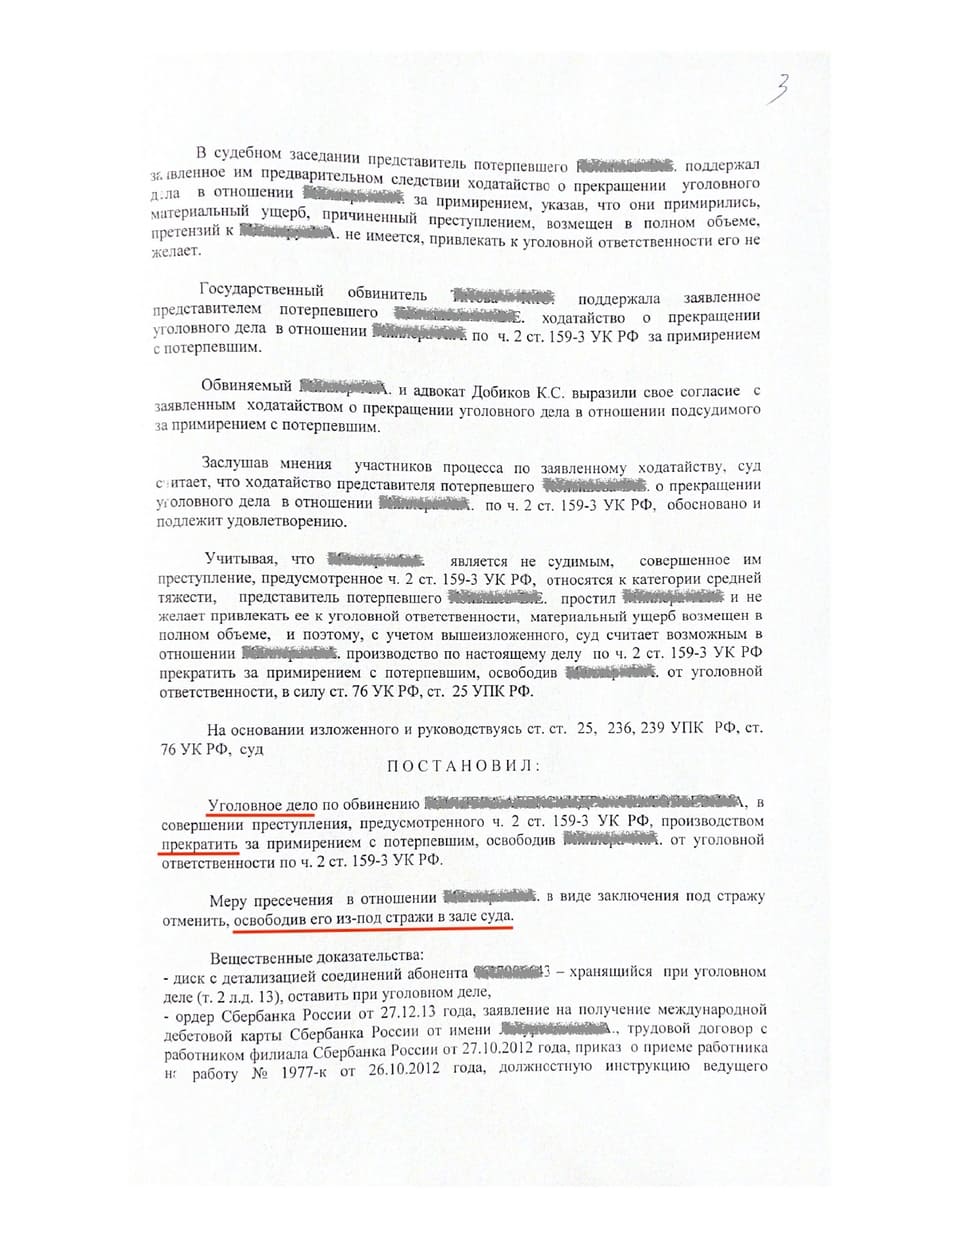 Ч.2 ст. 159.3 УК РФ.